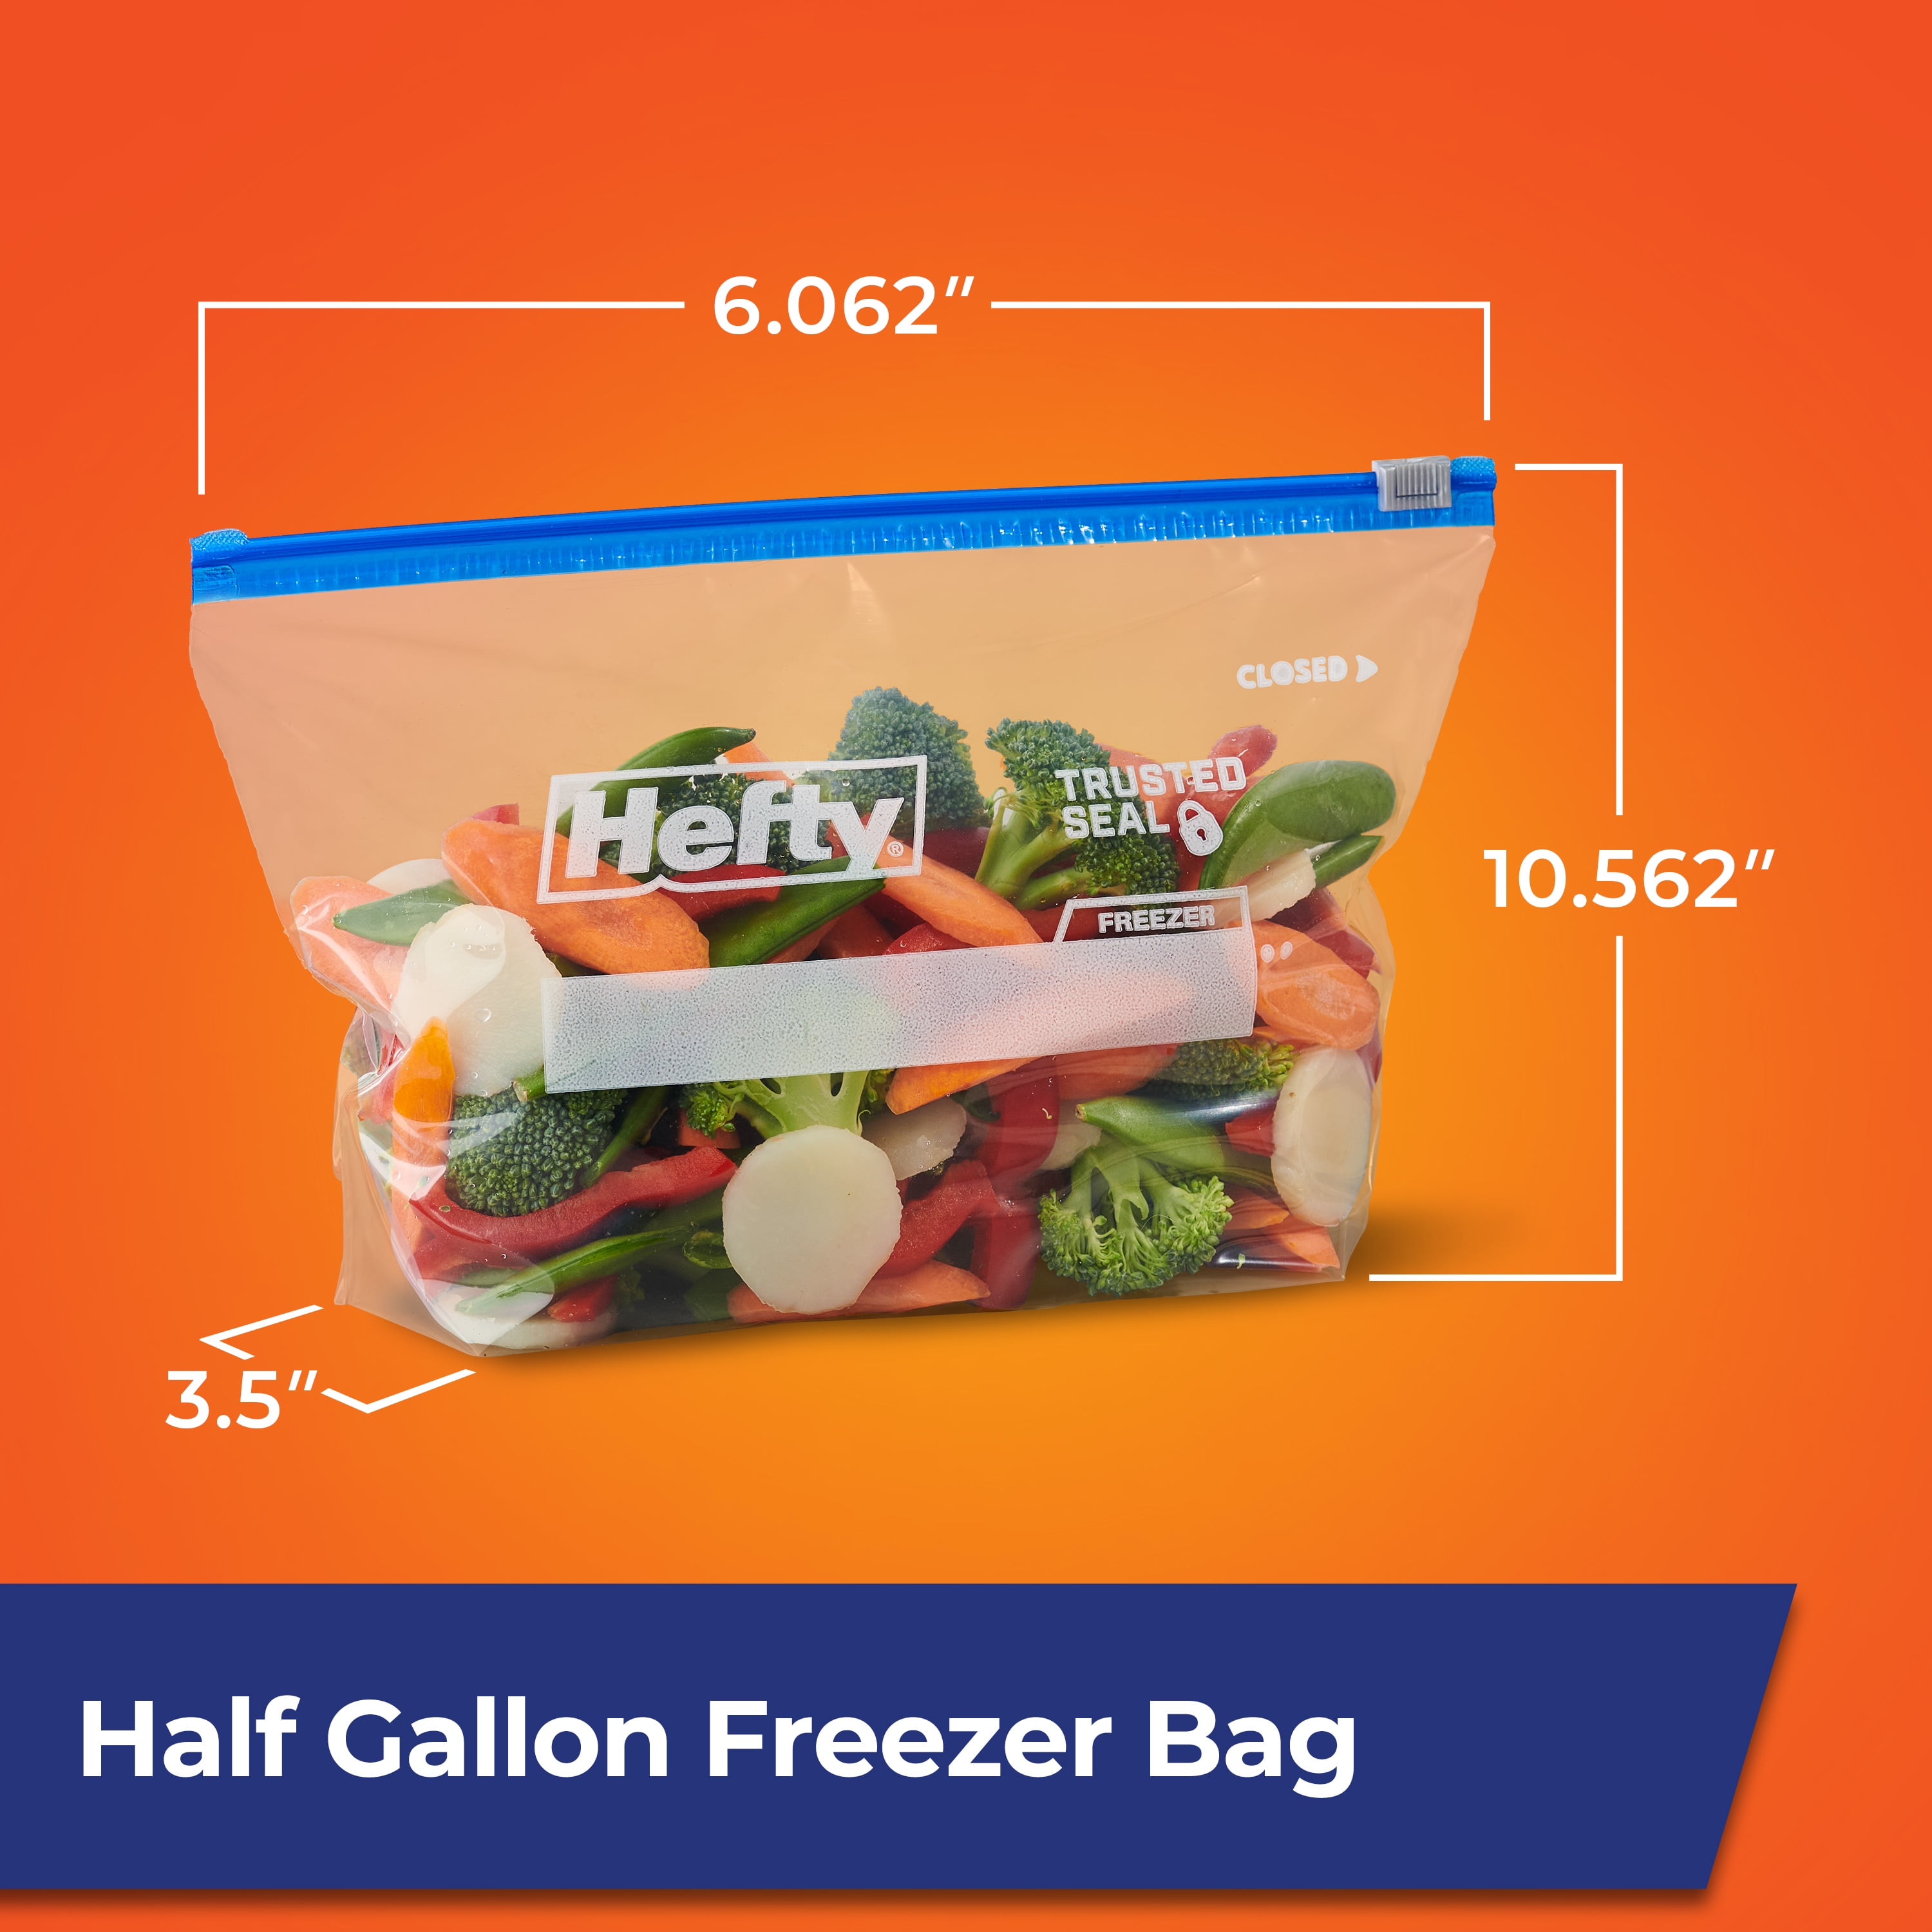 Gallon Freezer Bag - In His Hands Birth Supply